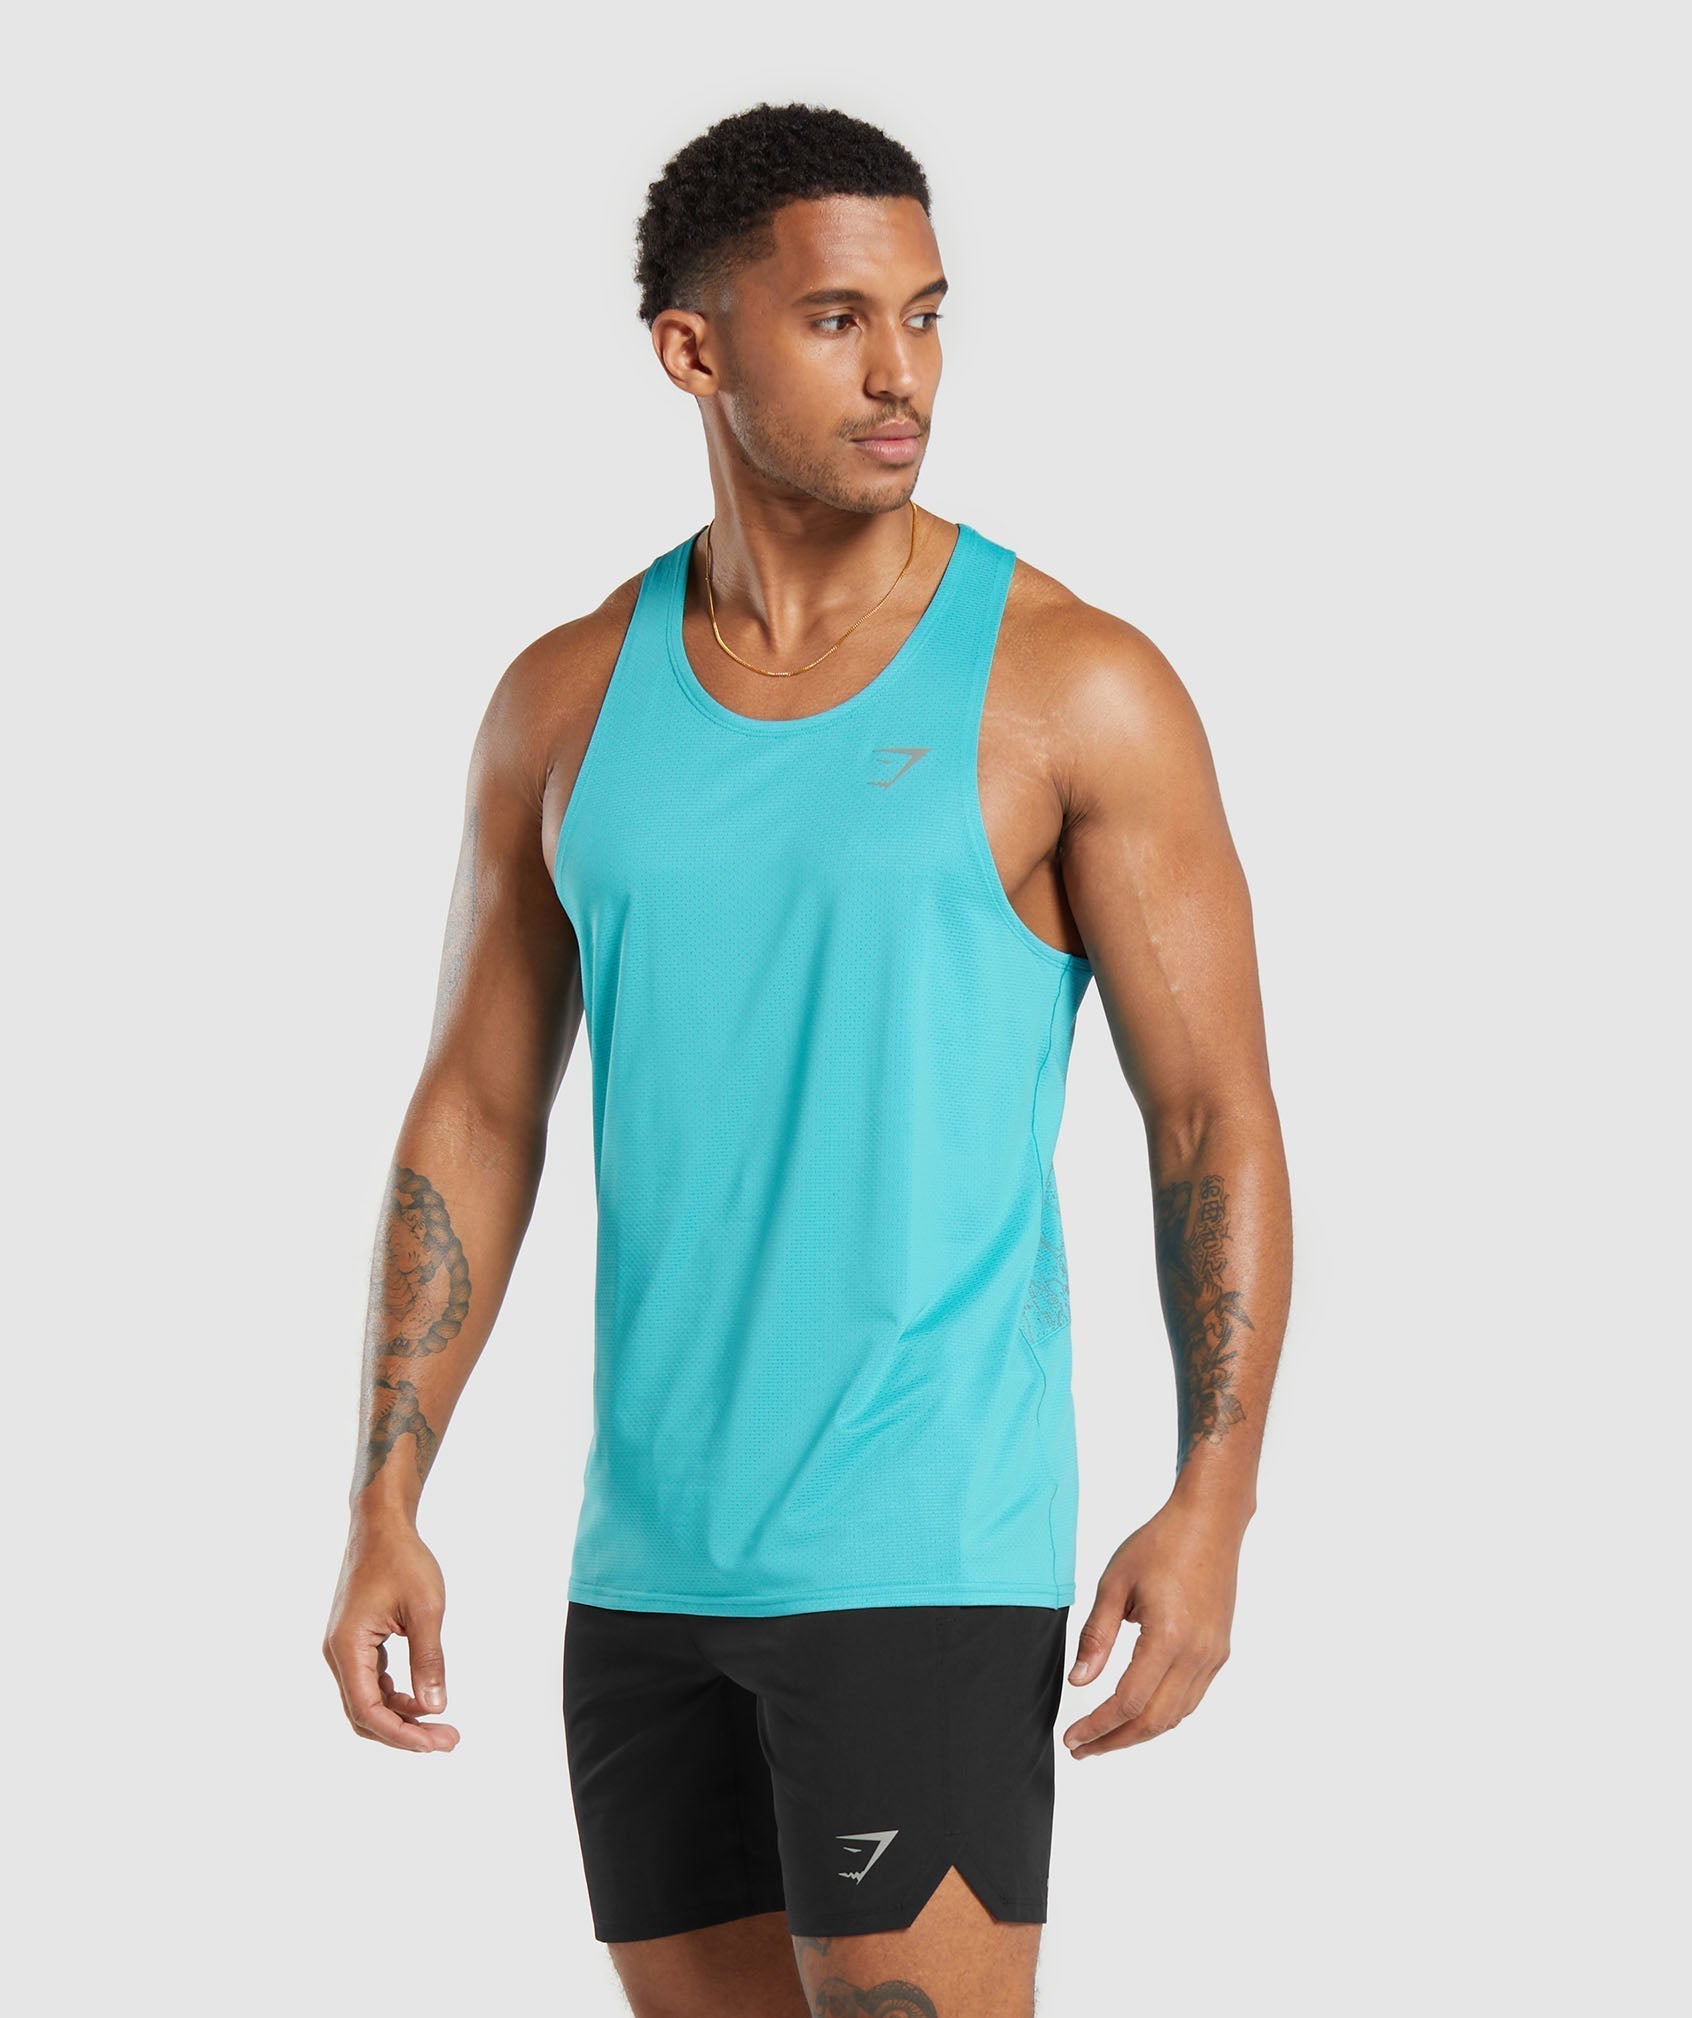 Speed Tank in Artificial Teal - view 4